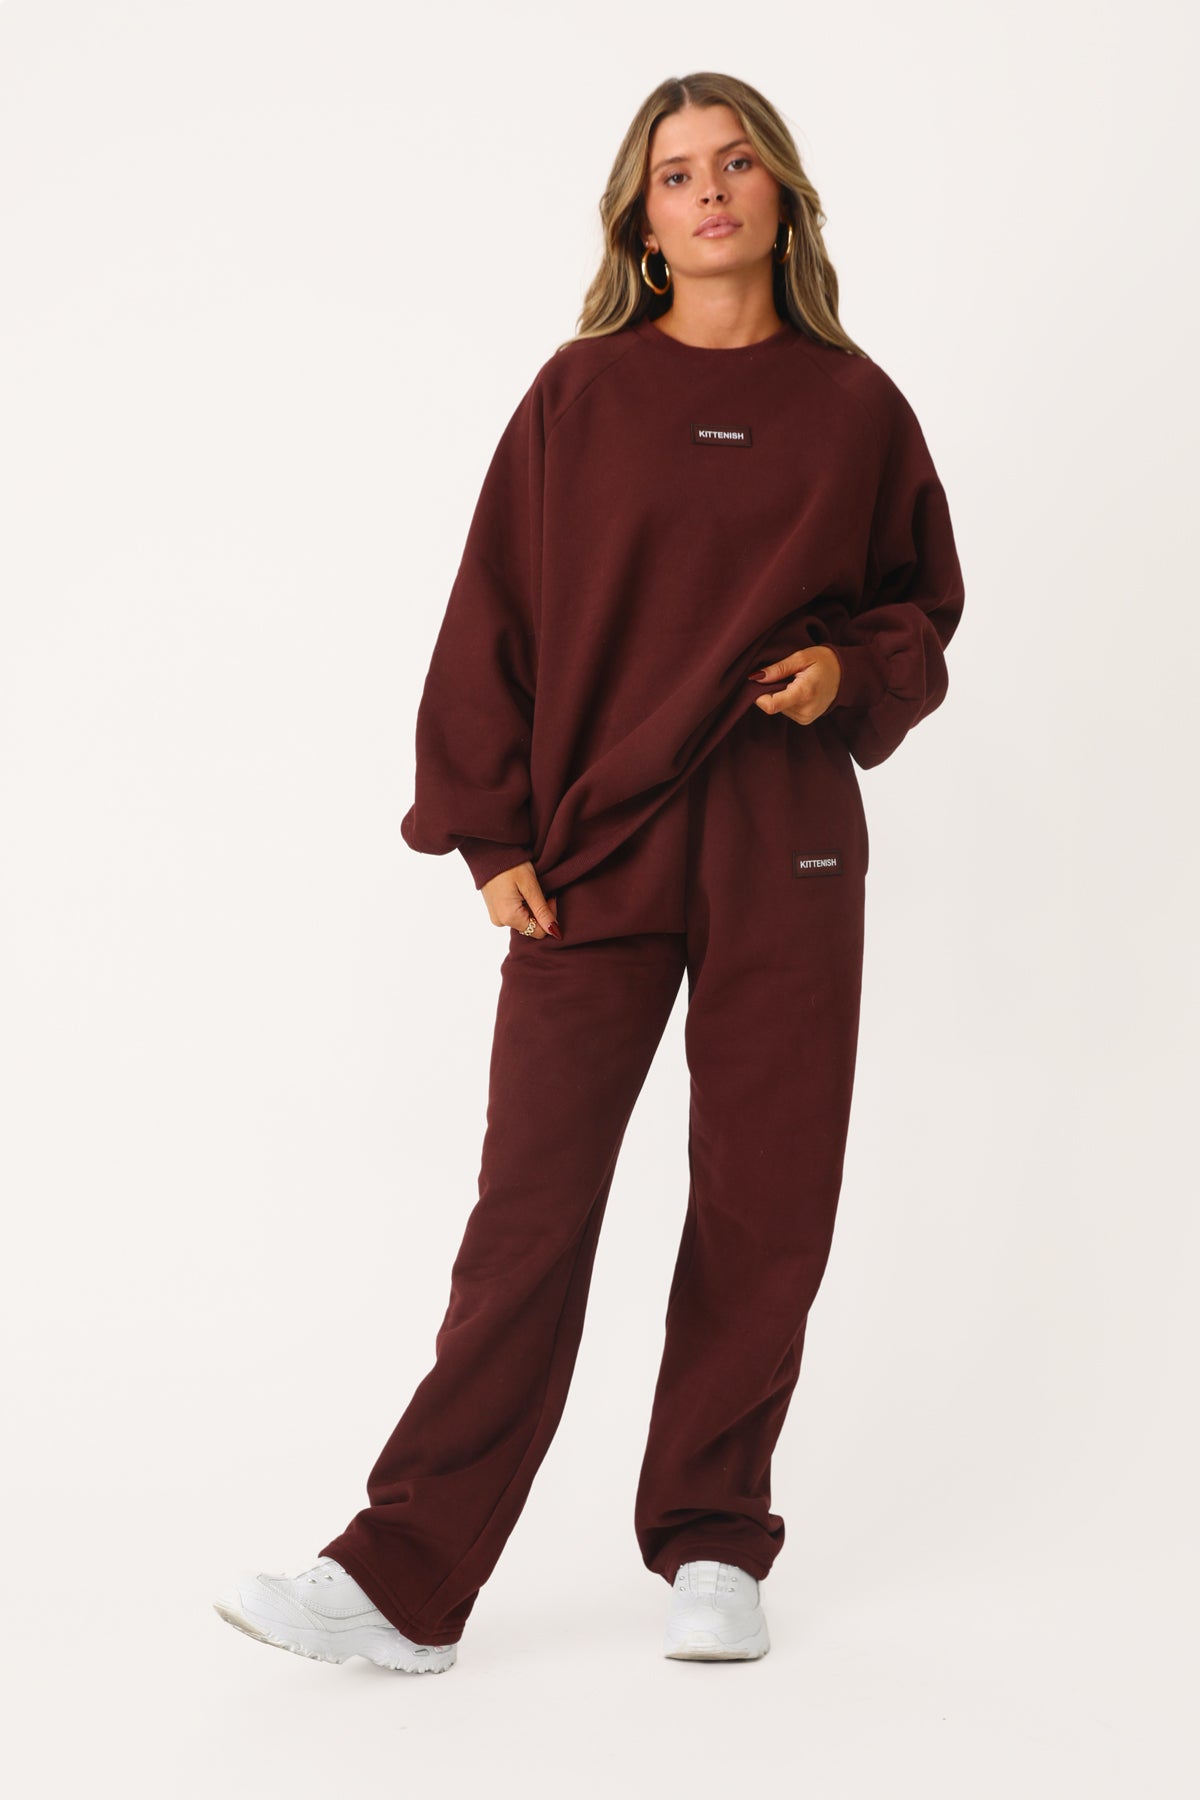 Petite Burgundy Cropped Sweat and Set Sweatpants  Matching sweat set,  Burgundy sweatpants outfit, Red sweatpants outfit